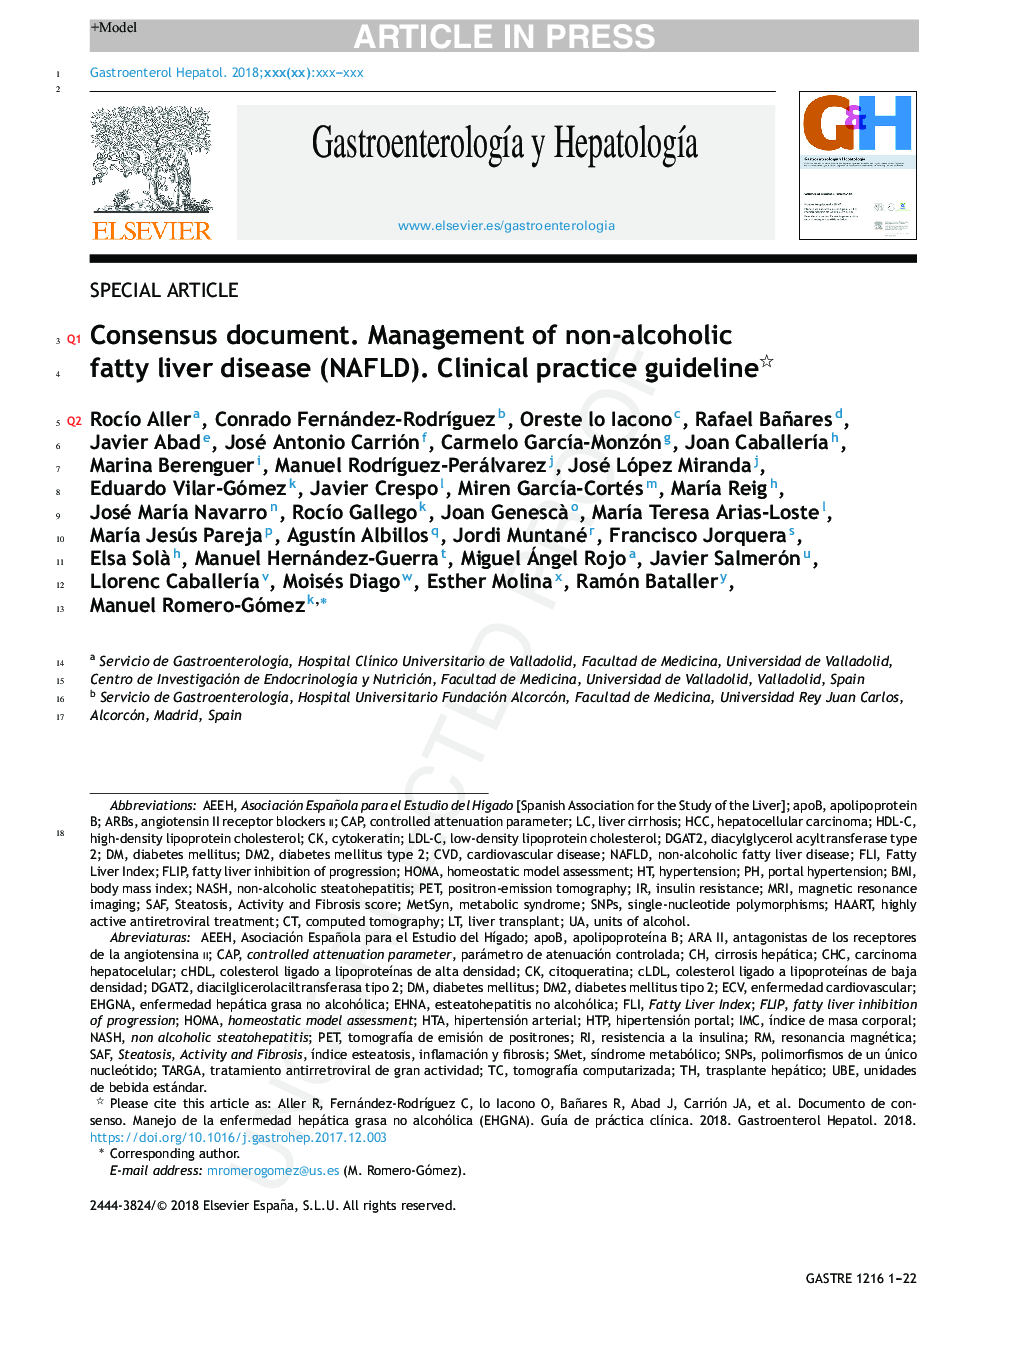 Consensus document. Management of non-alcoholic fatty liver disease (NAFLD). Clinical practice guideline